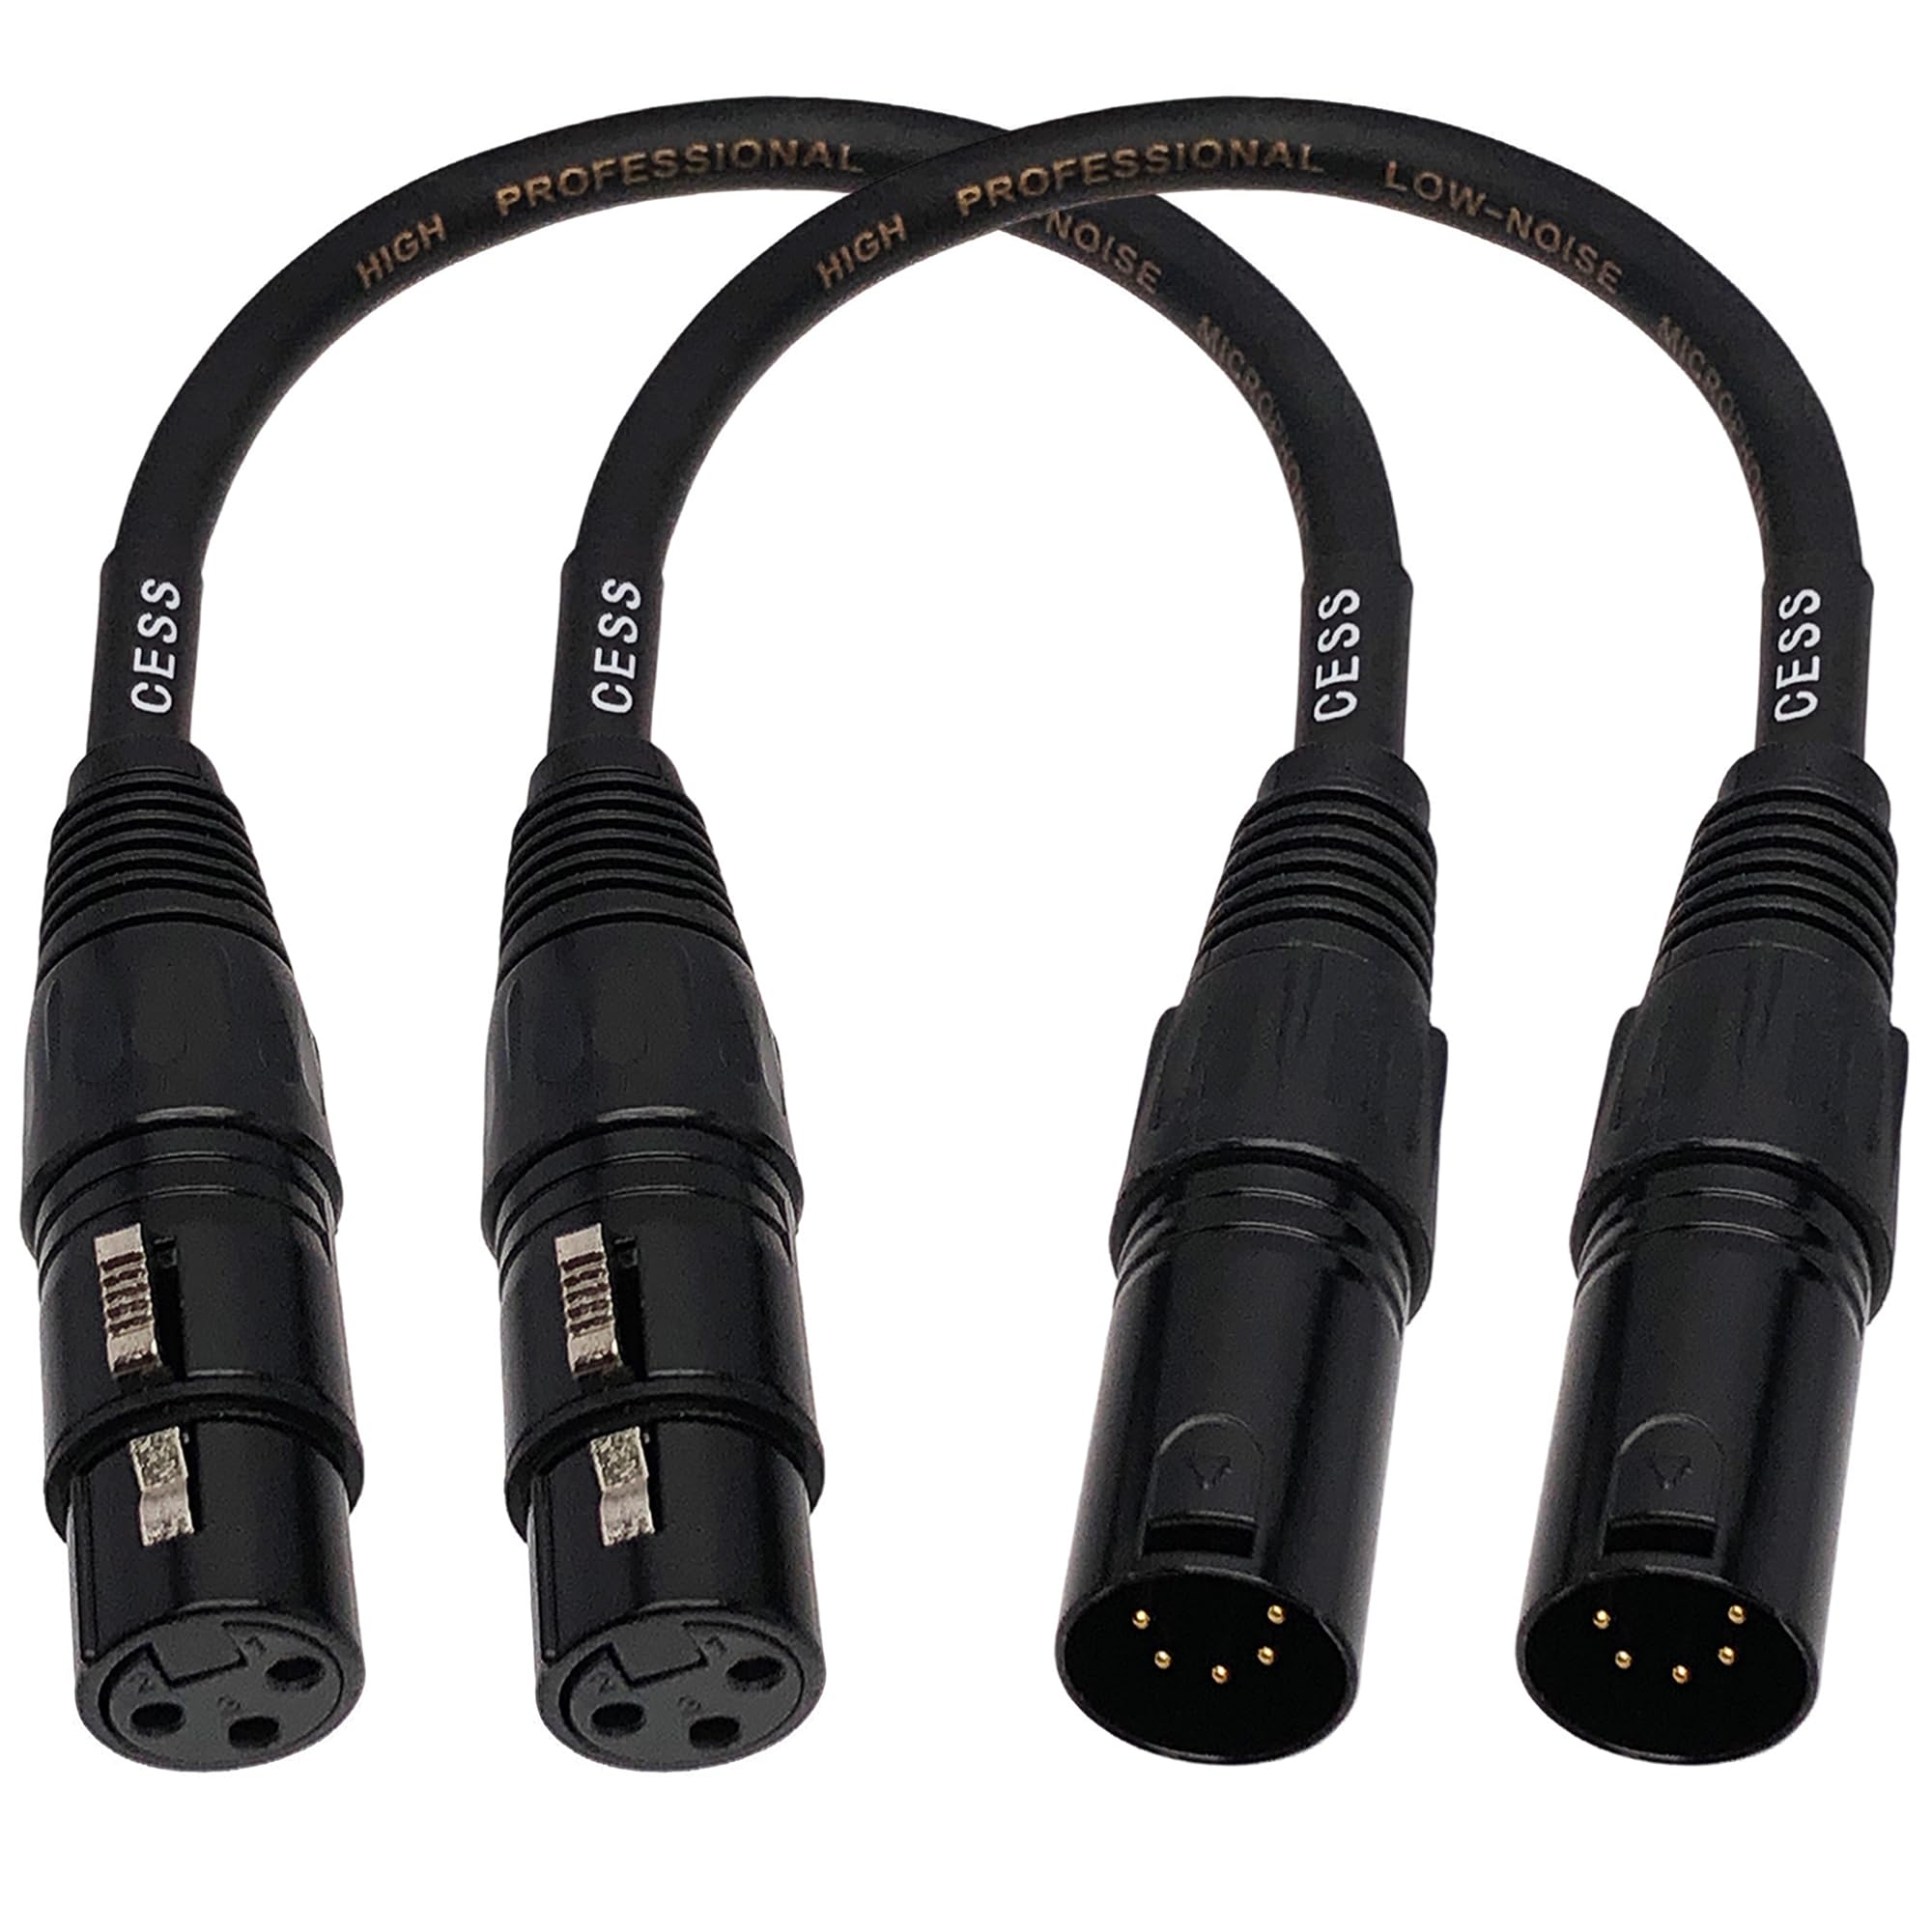 CNCESS CESS-017 XLR5M to XLR3F, 3 Pin XLR Female to 5 Pin XLR Male Audio Cable for Microphone, 2 Pack